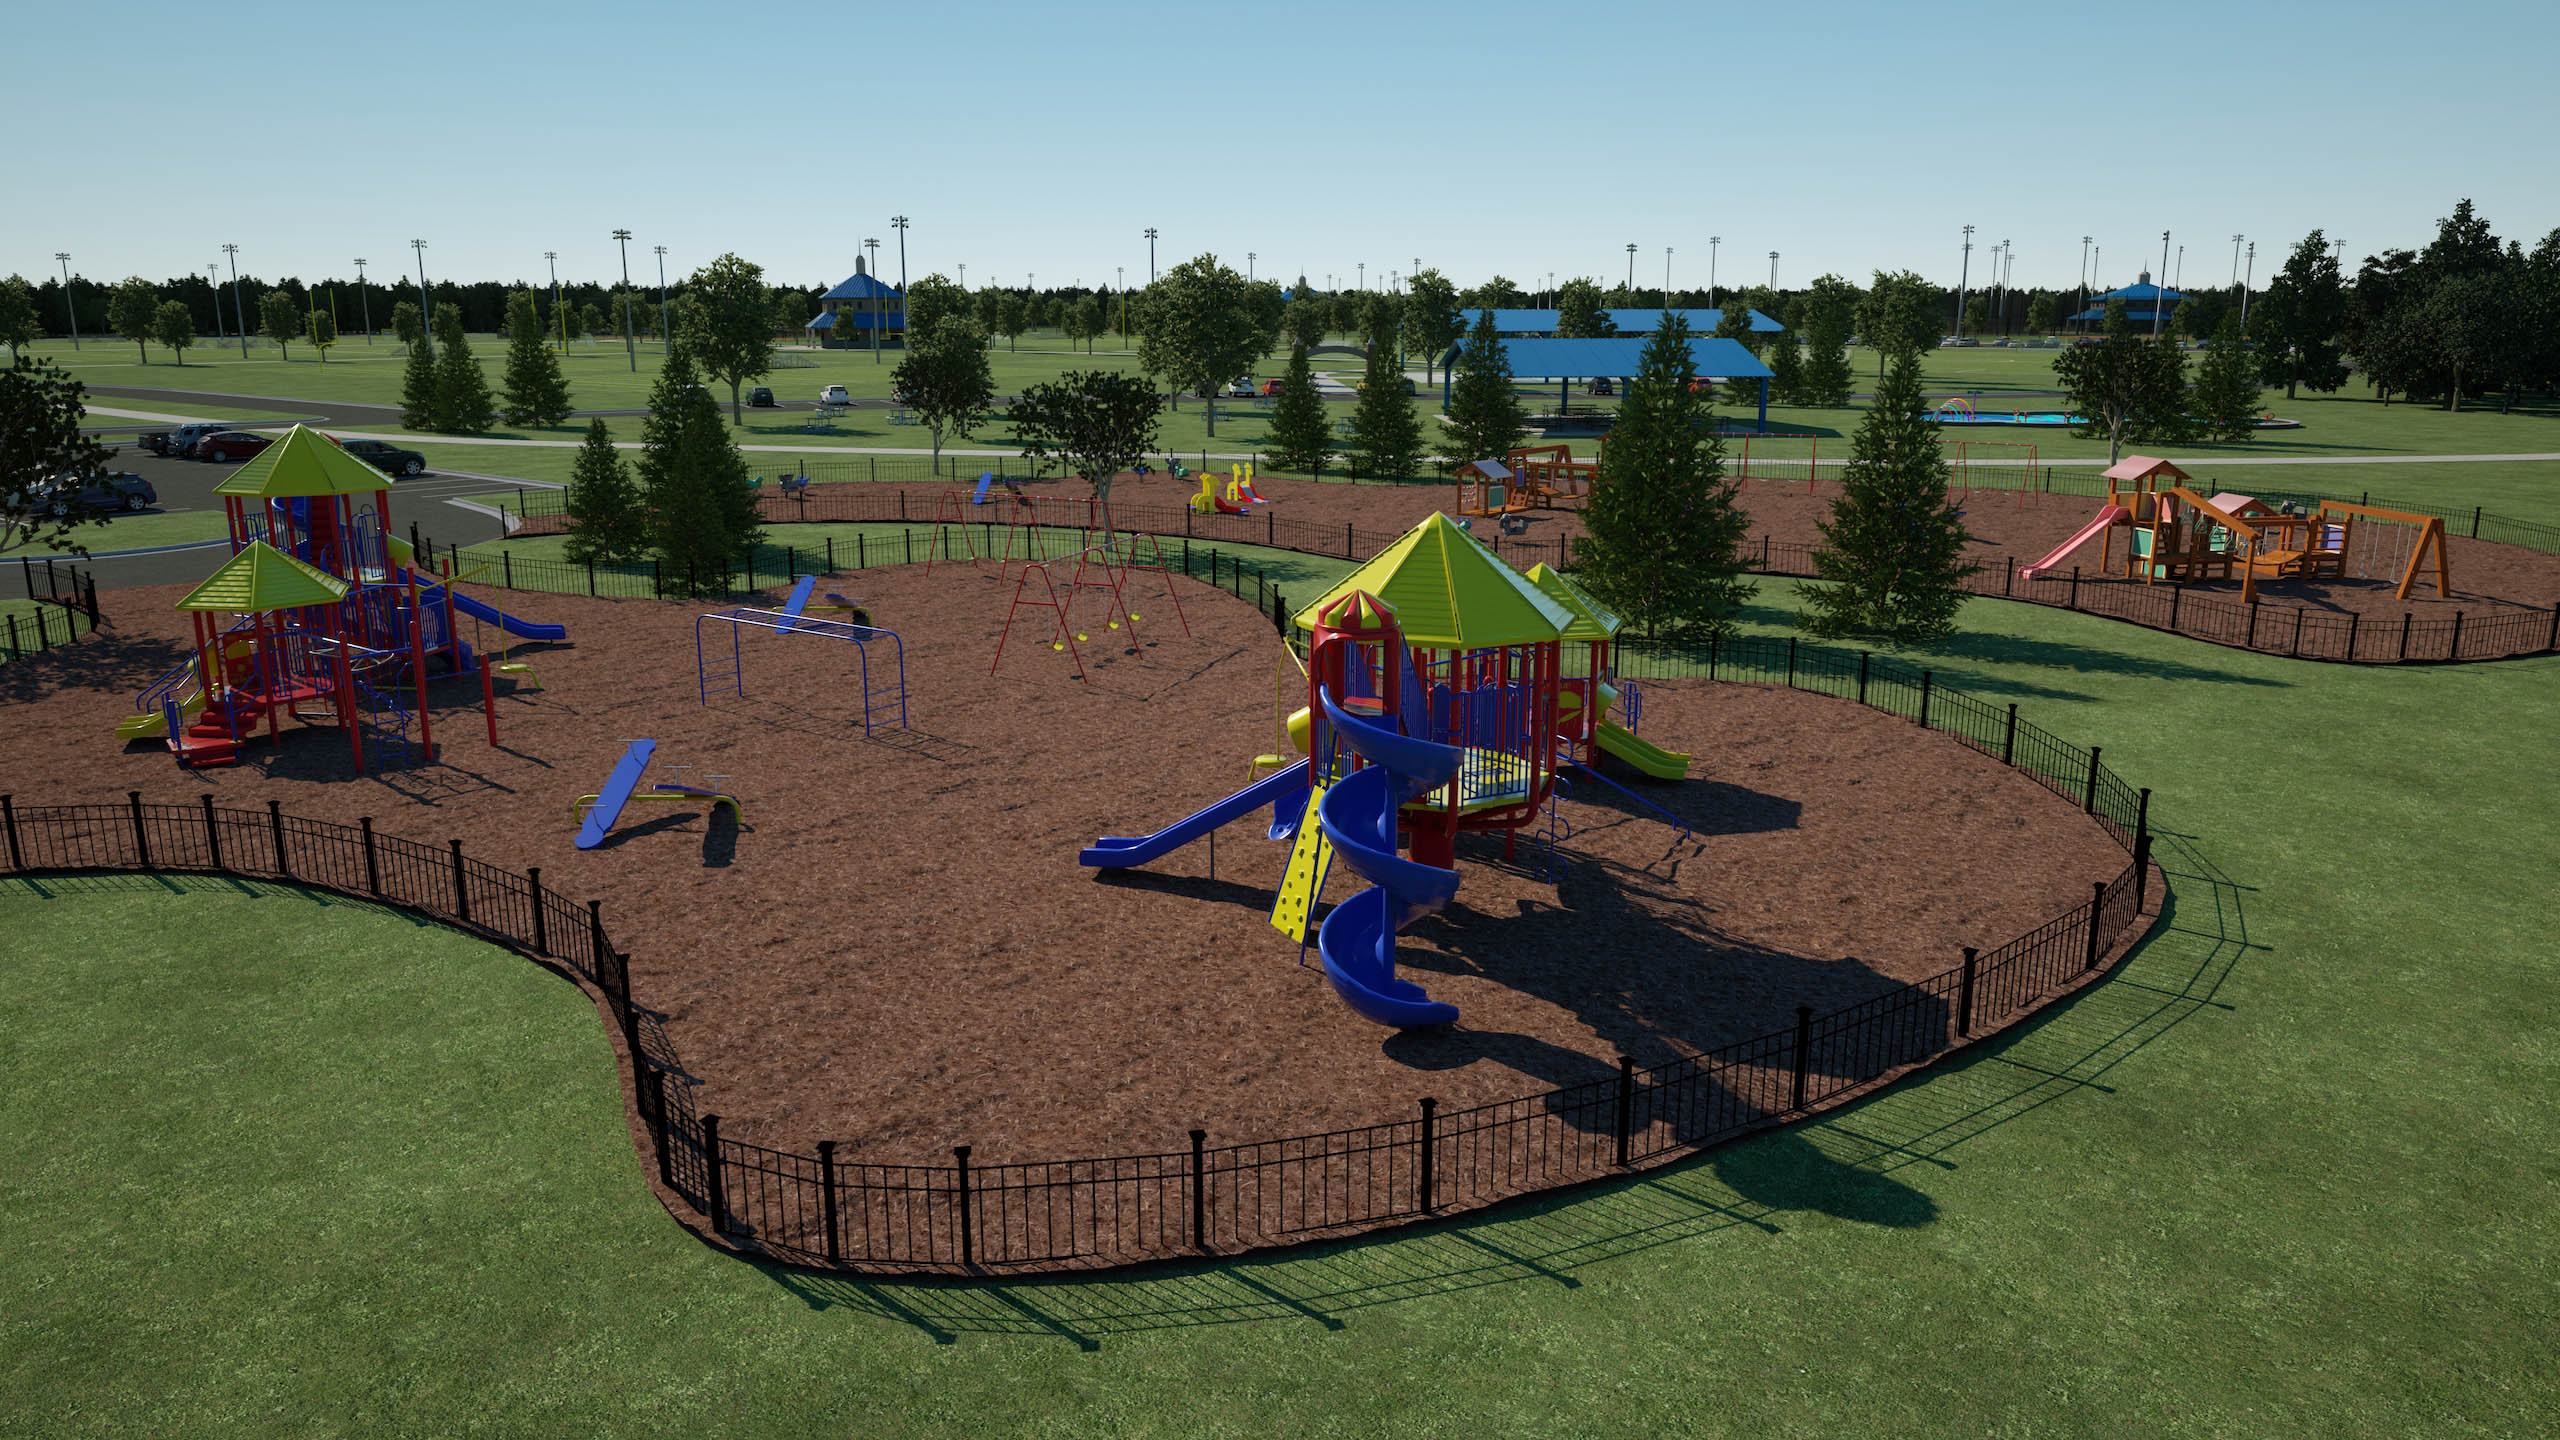 Playground area at project site